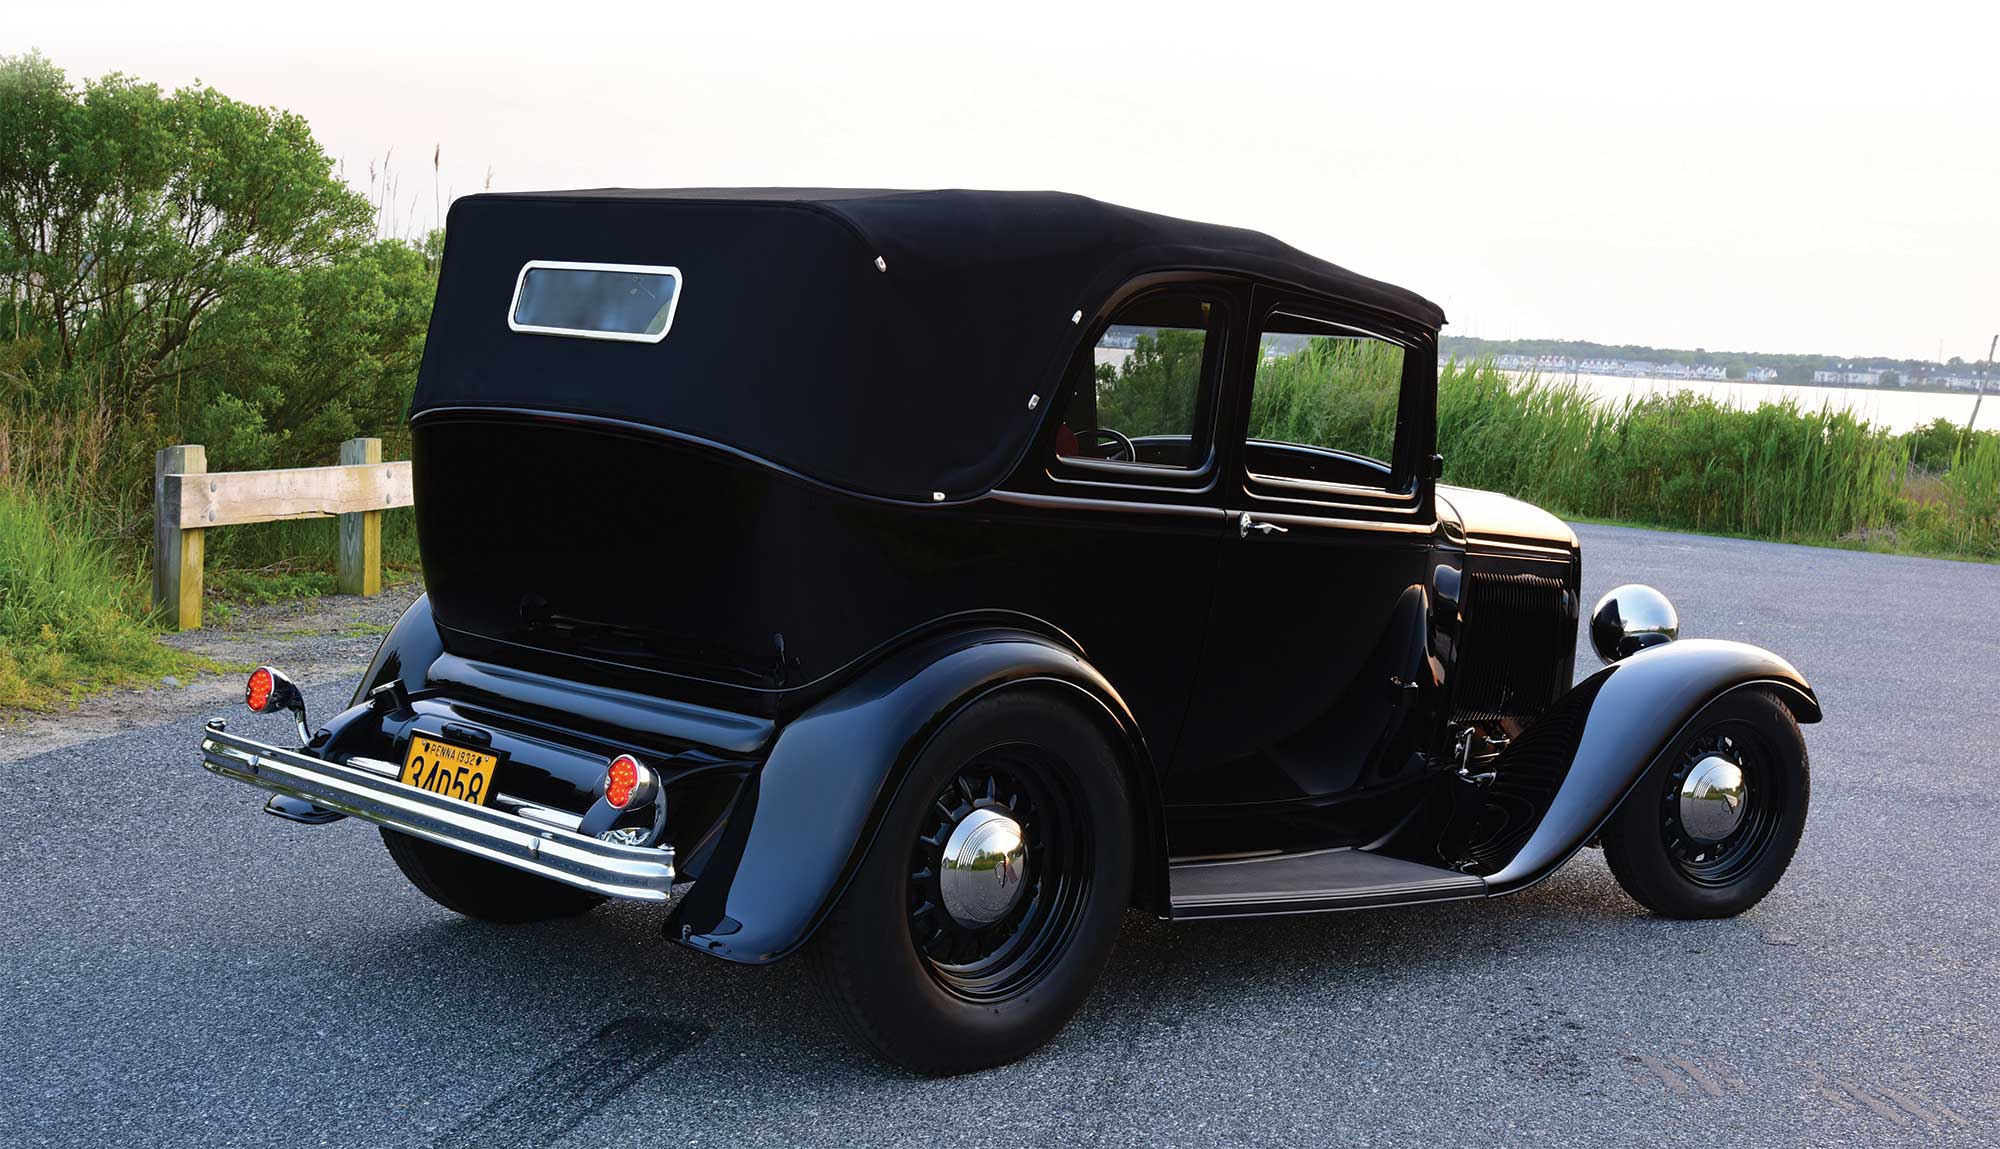 1932 Ford B-400 side profile displayed on cement road